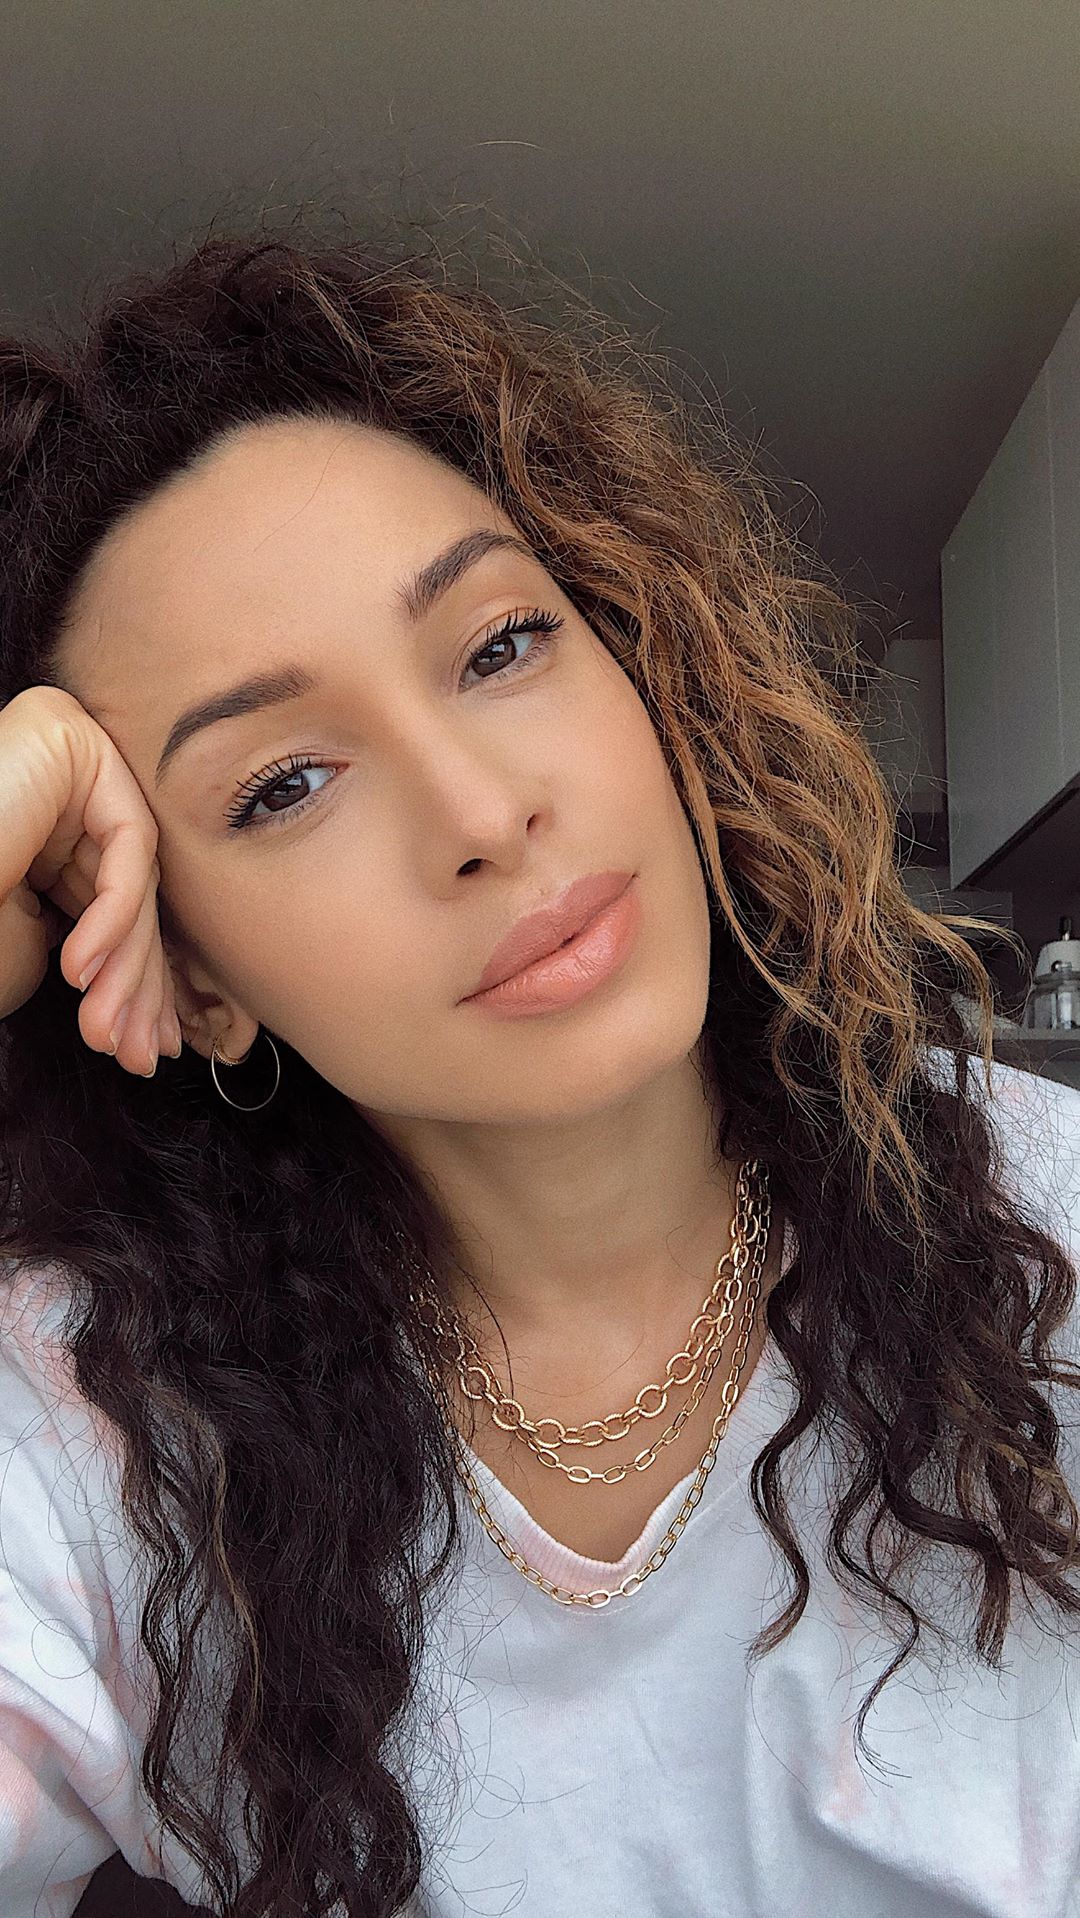 Max Factor - Want to know how to nail a fresh skin, natural, dewy makeup look? Of course you do! It looks effortless and is perfect for working from home! Max Factor ambassador @daniellepeazer talks u...